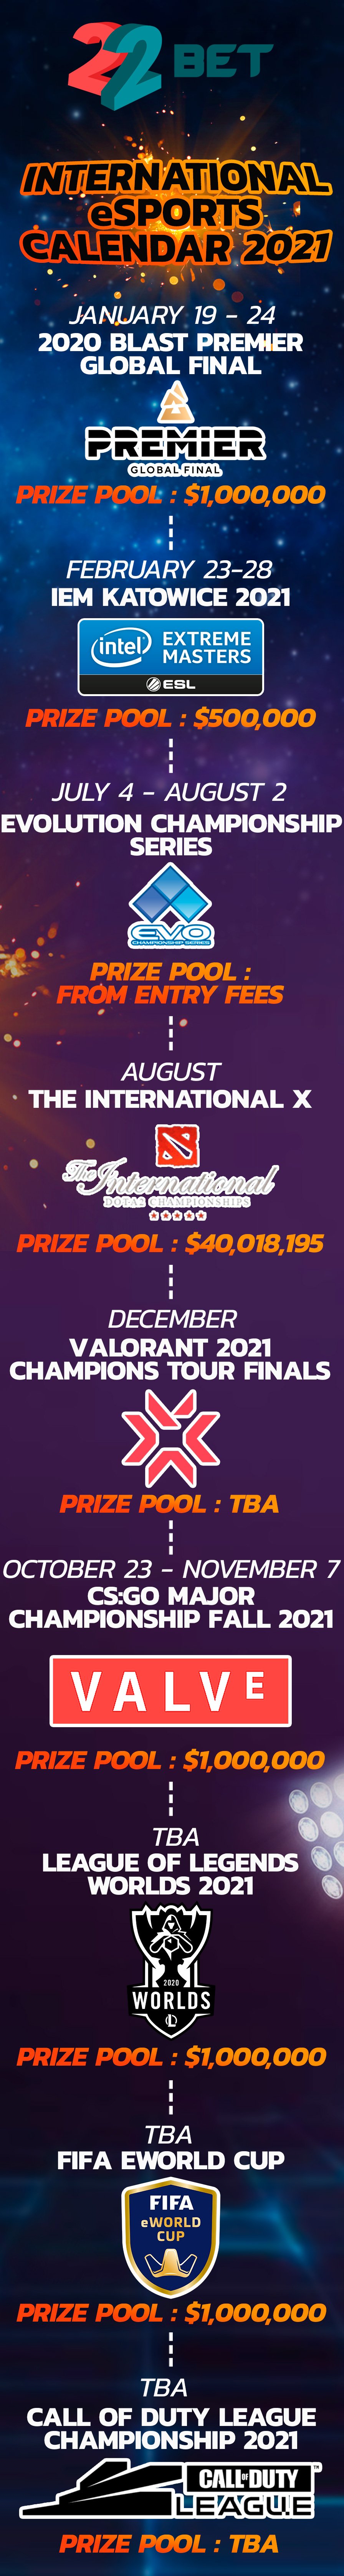 International eSports Calendar for 2021: dates and prize pools.